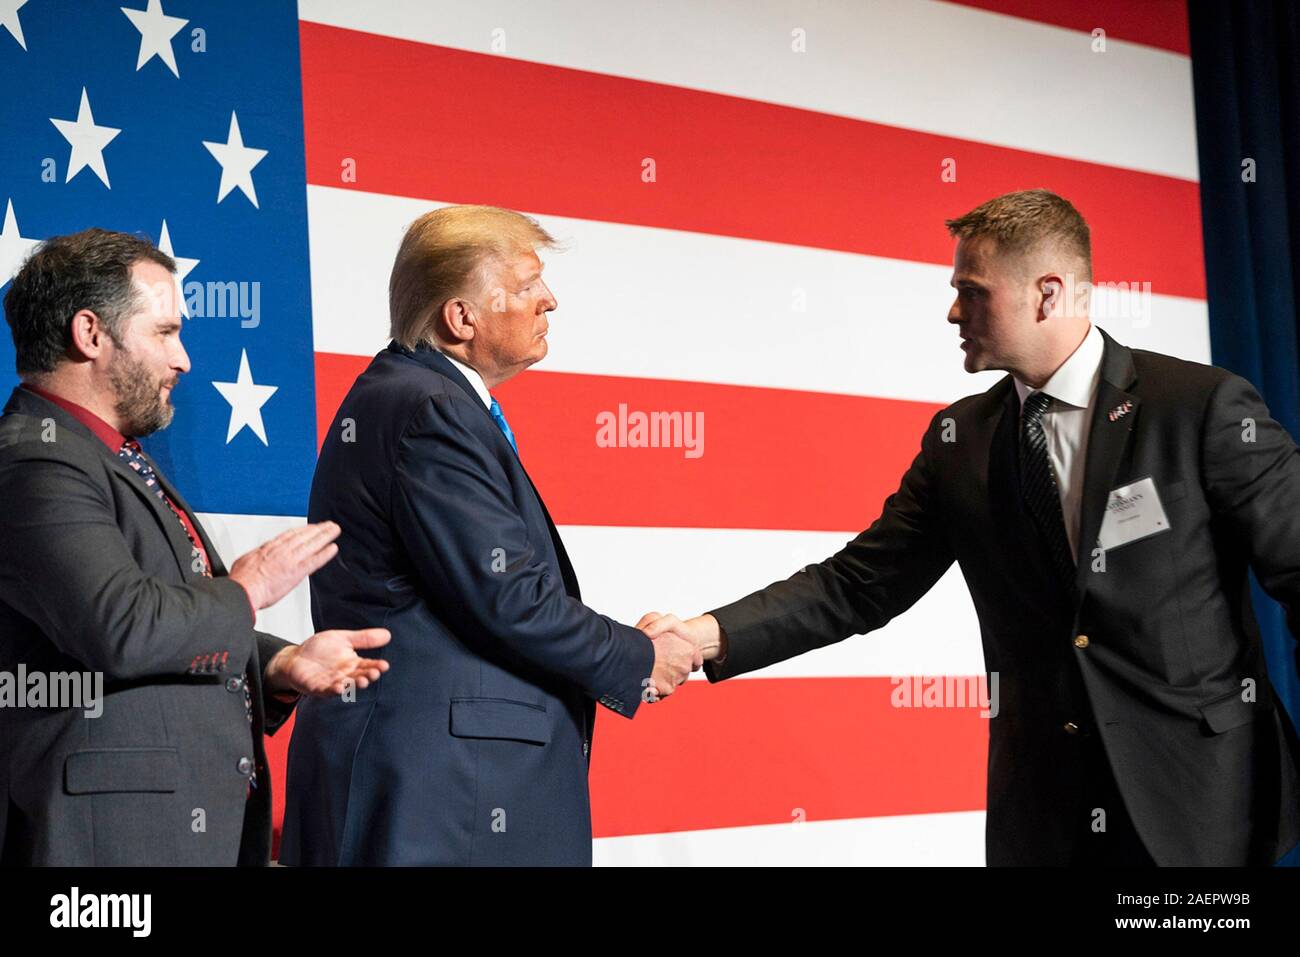 U.S President Donald Trump welcomes Army First Lieutenant Clint Lorance and Army Major Mathew Golsteyn to the stage prior to his remarks at the Florida Republican Party Statesman Dinner December 7, 2019 in Aventura, Florida. Both soldiers were recently granted full pardons by President Trump following their convictions for war crimes committed in Afghanistan. Stock Photo